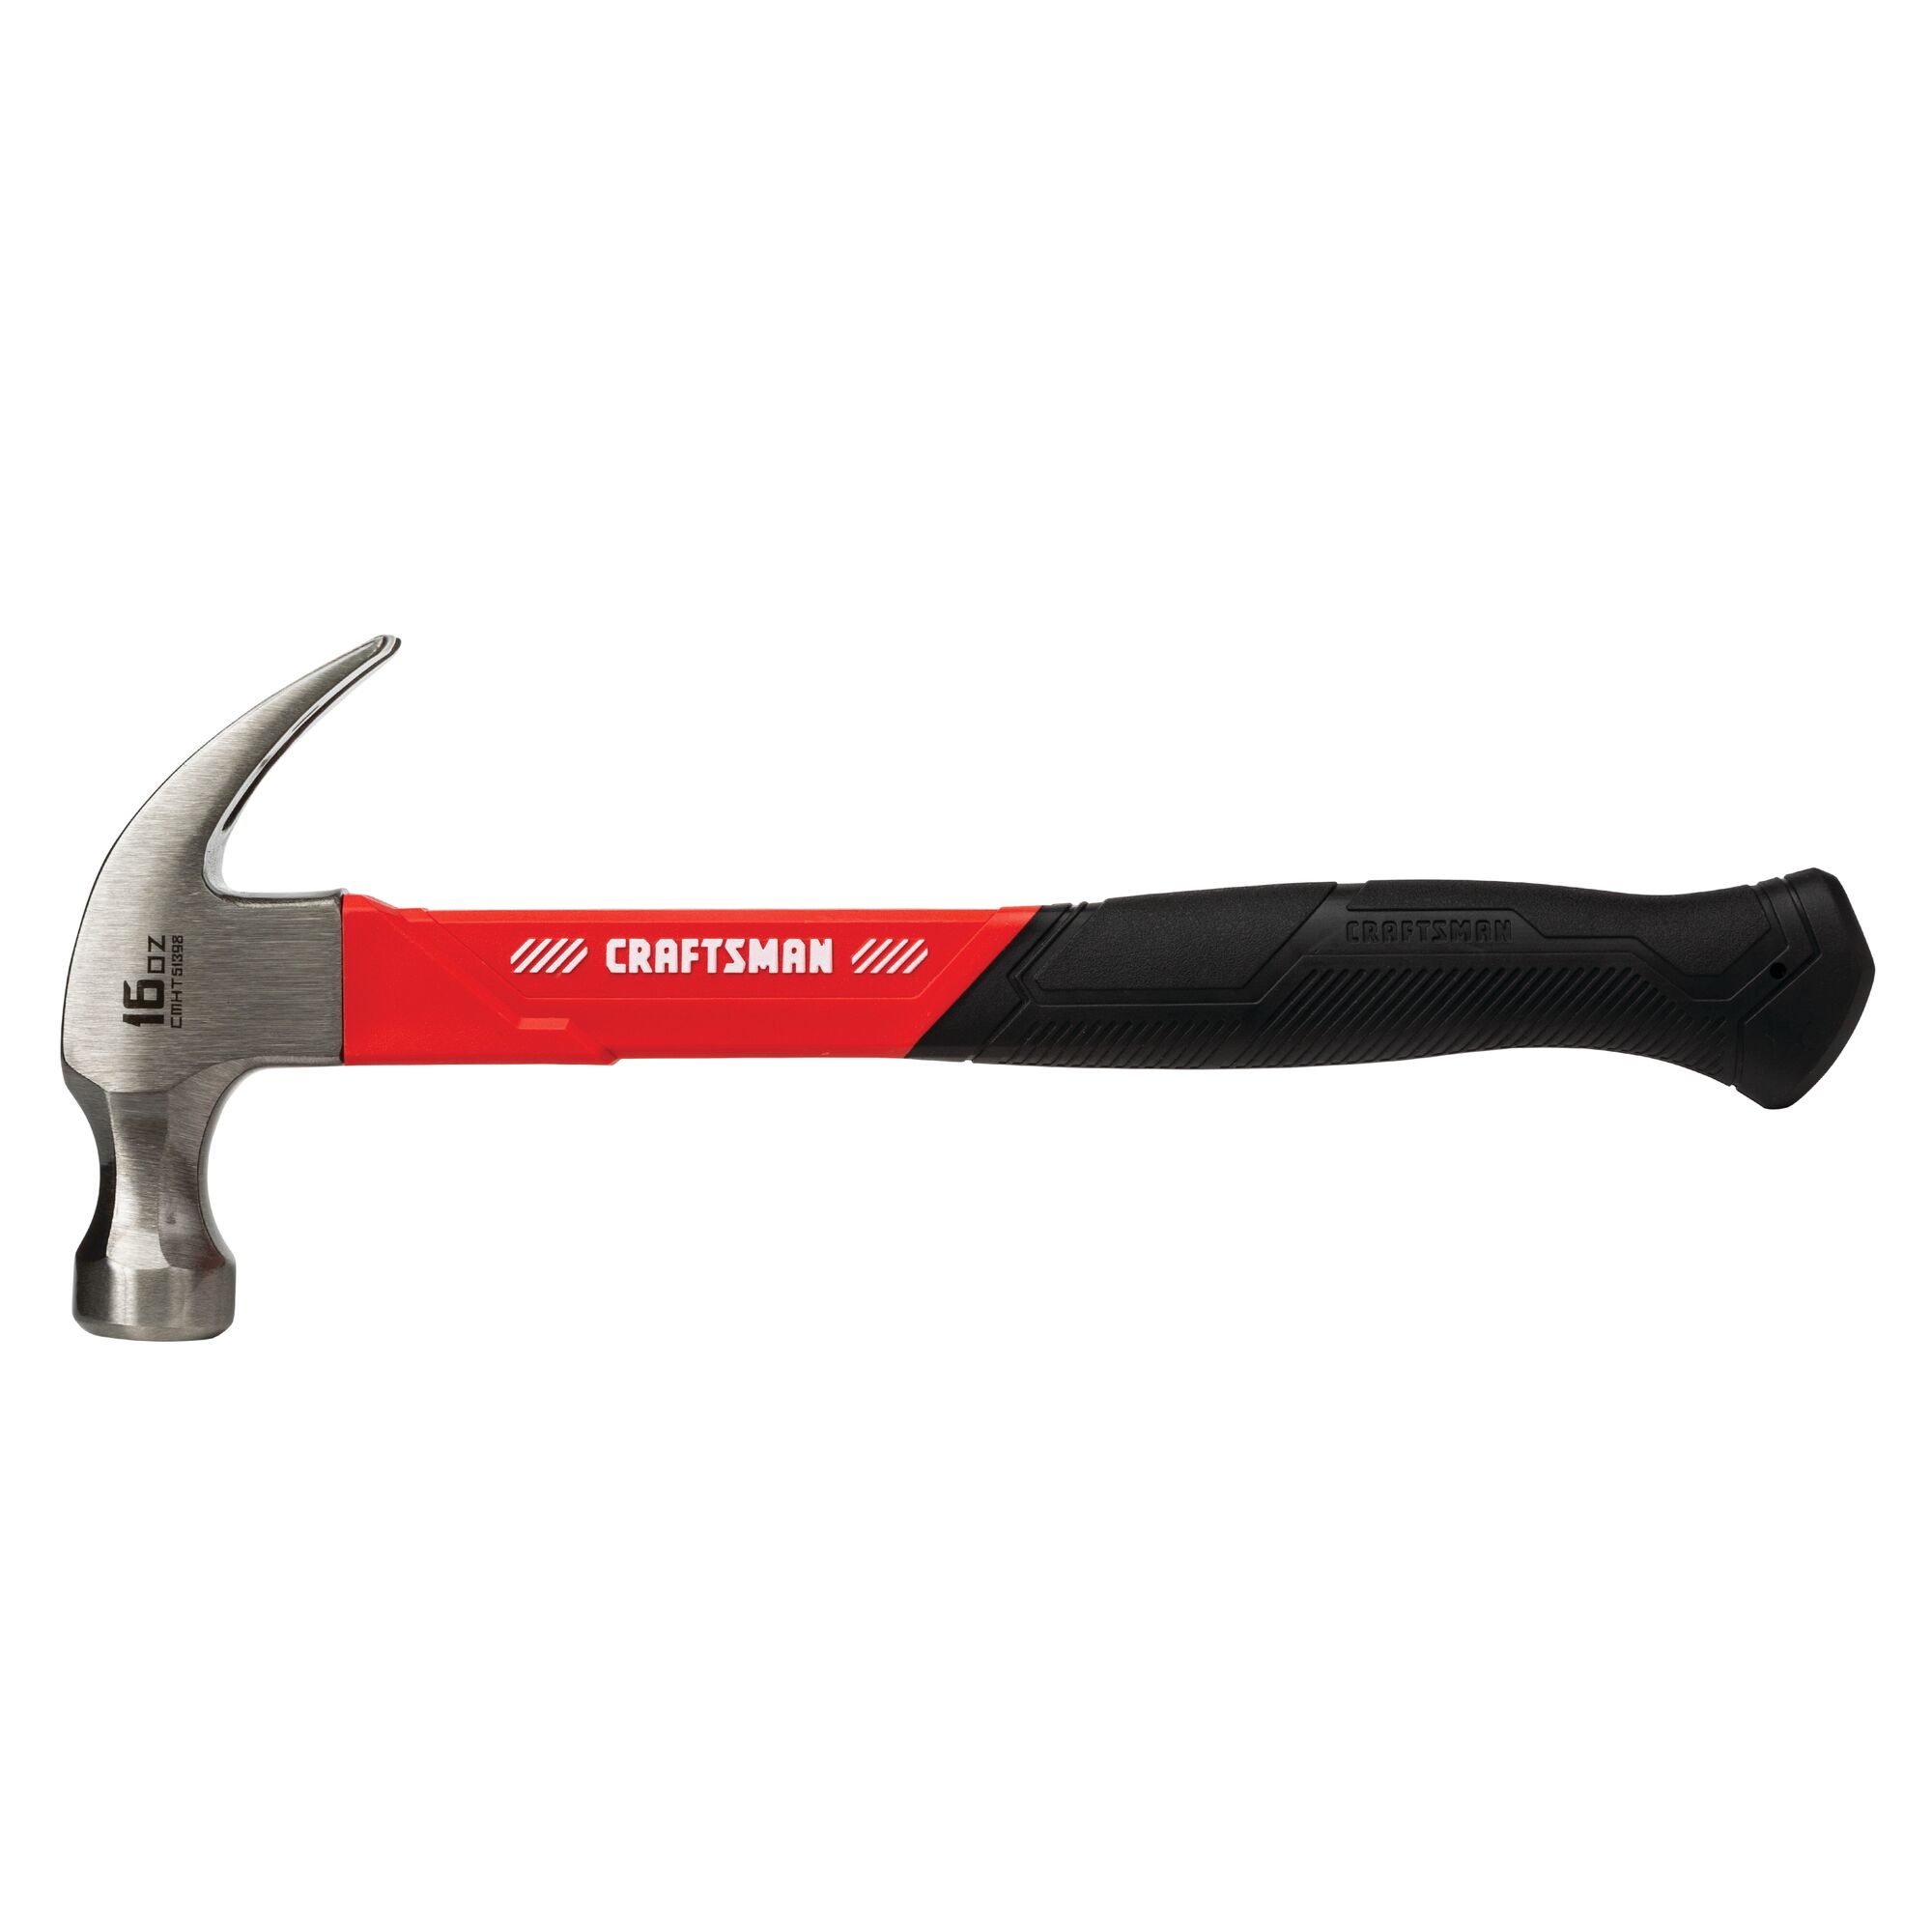 View of CRAFTSMAN Hammers: Dead Blow Hammers: Fiber Grip on white background